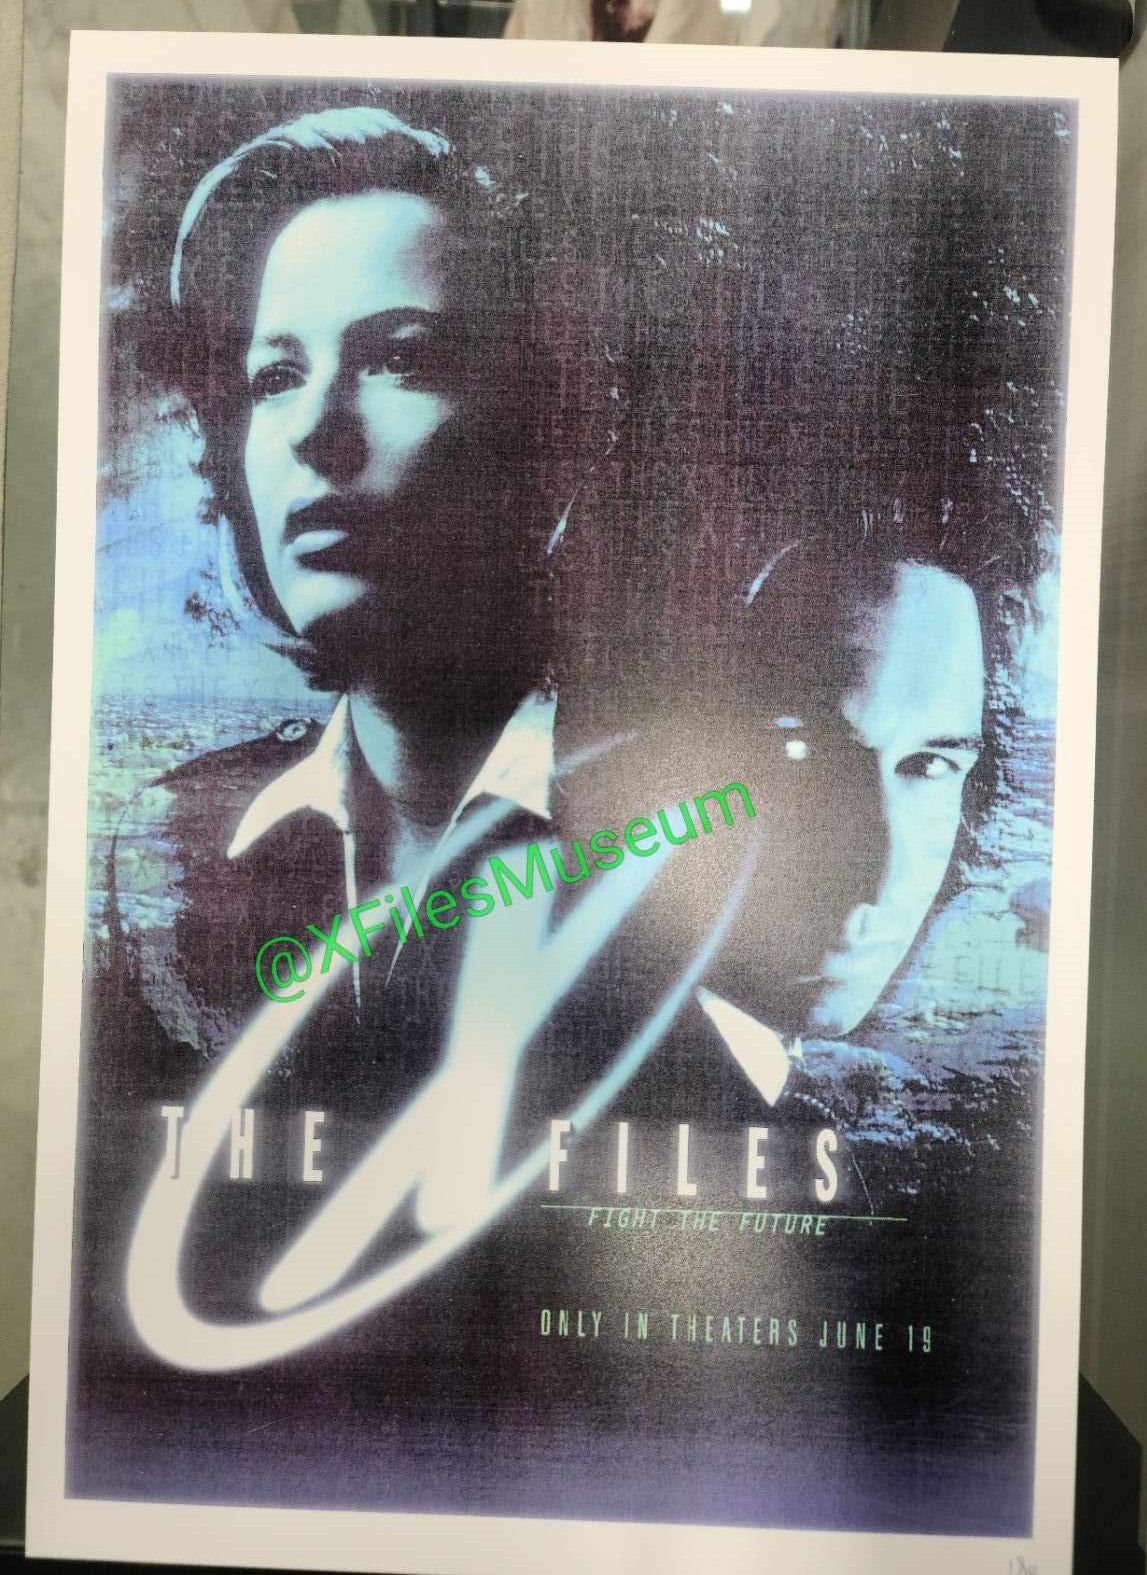 The X-Files FIGHT THE FUTURE Concept Art Print 13" x 19" Poster Print - 57